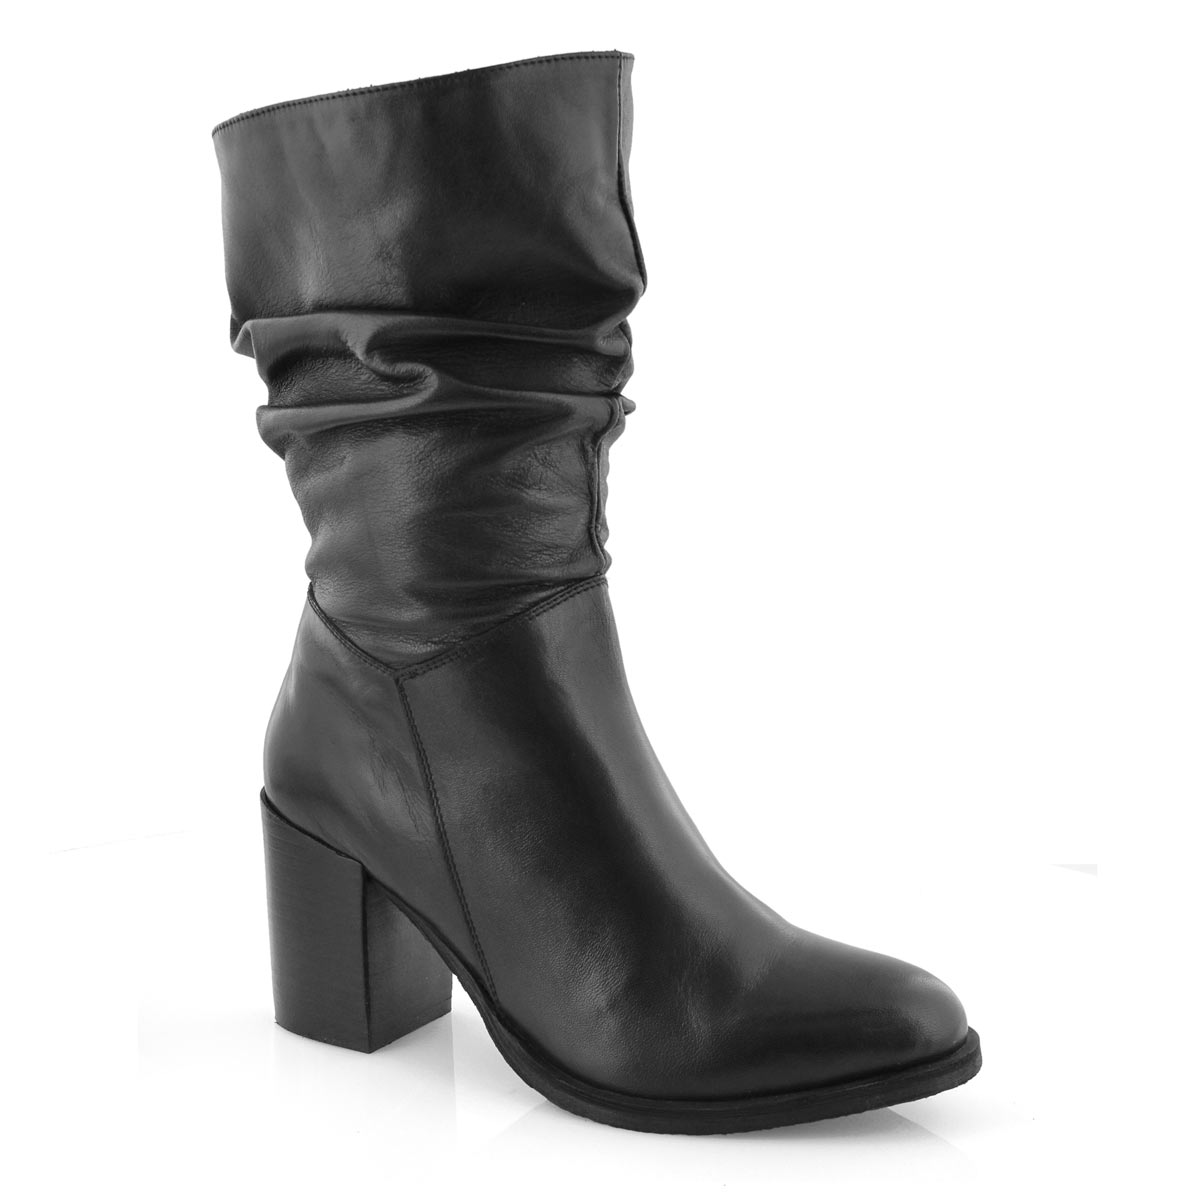 DUCHESS black ankle boots | SoftMoc 